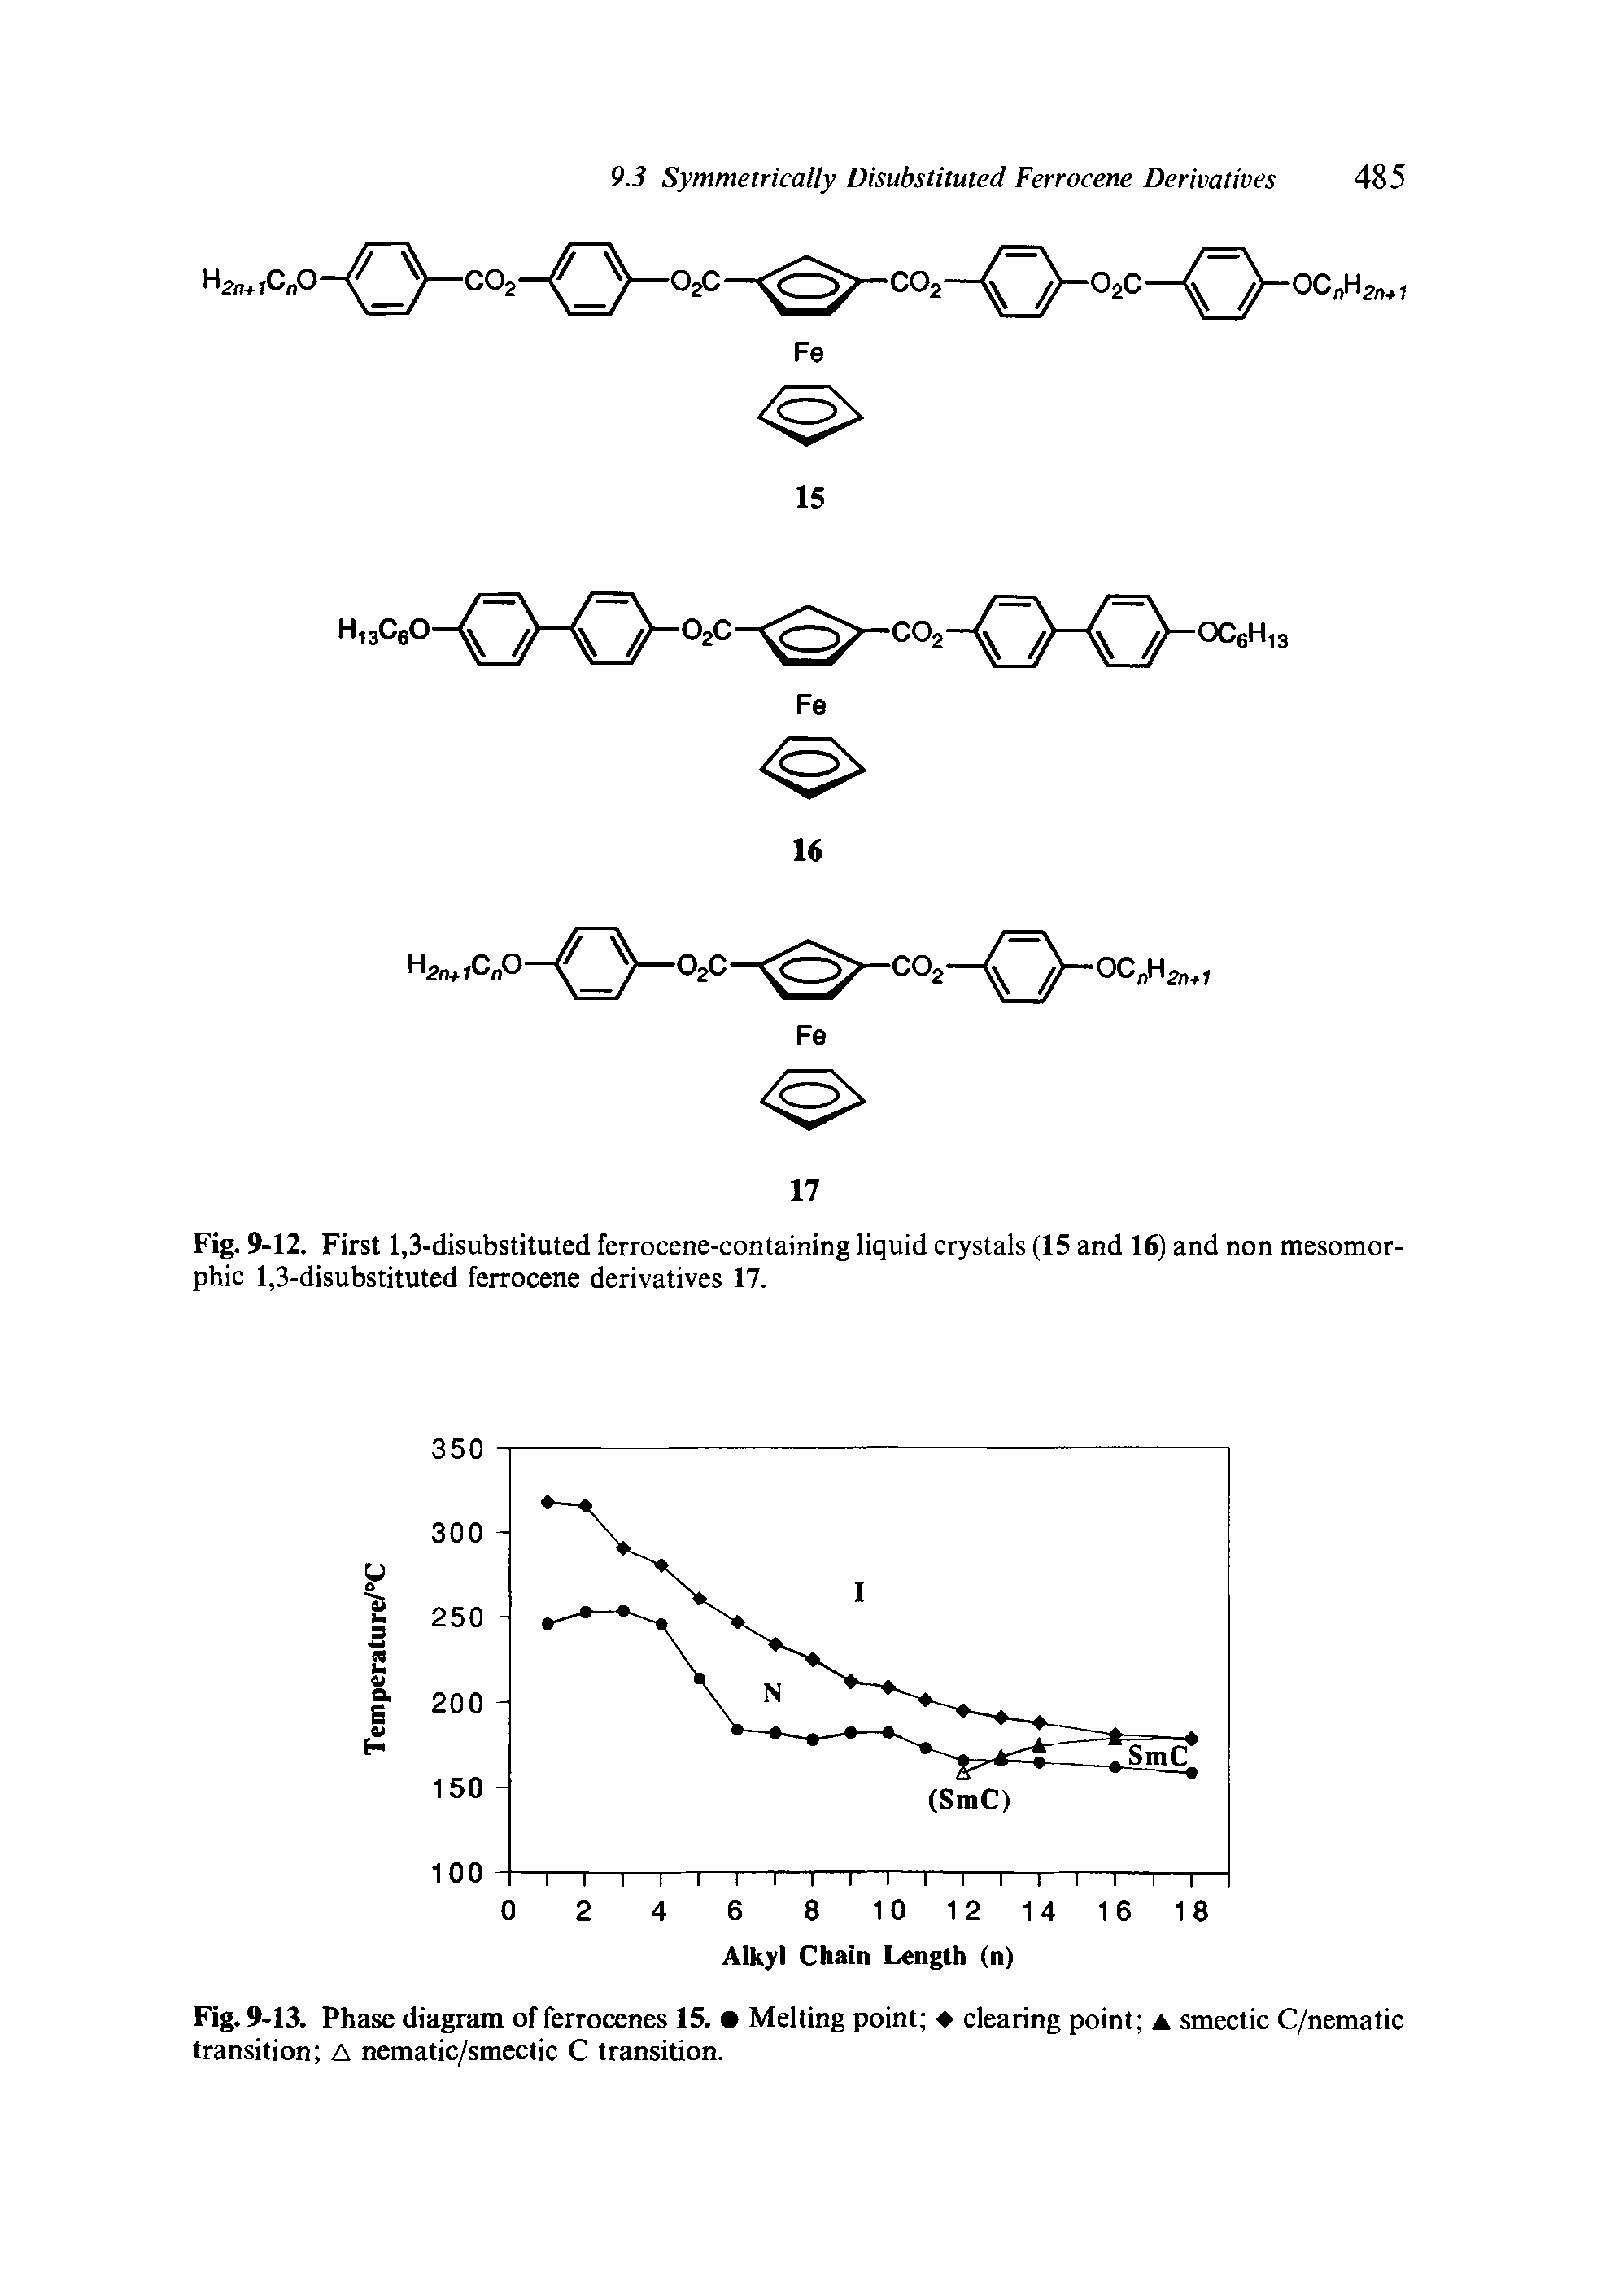 Fig. 9-12. First 1,3-disubstituted ferrocene-containing liquid crystals (15 and 16) and non mesomorphic 1,3-disubstituted ferrocene derivatives 17.